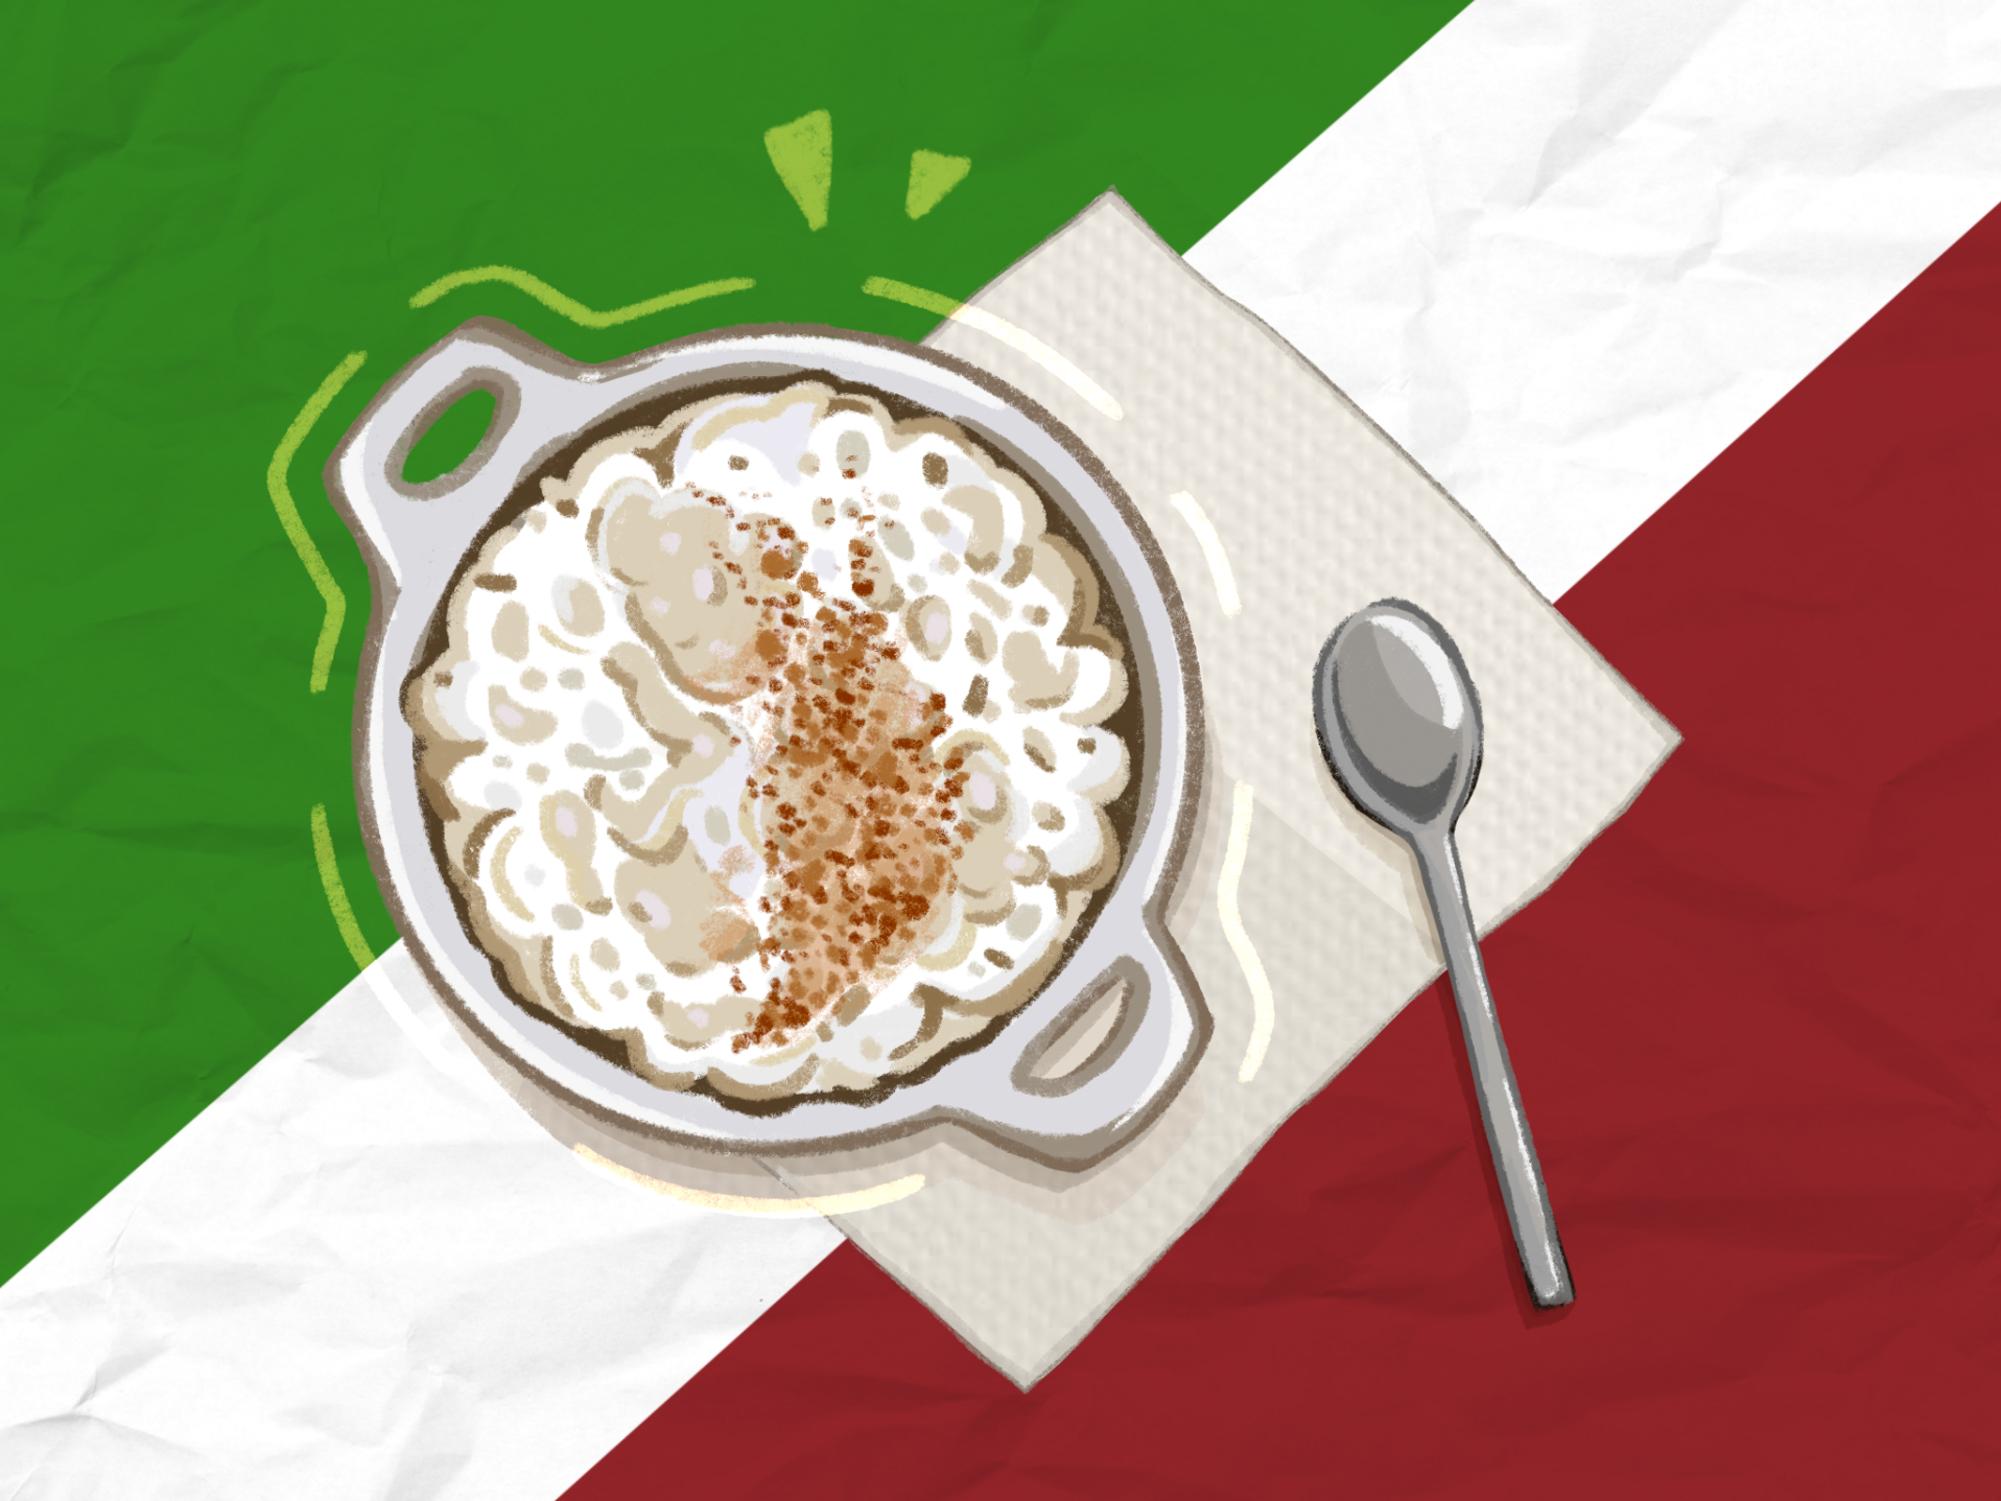 A colorful illustration of a plate containing arroz con leche on top of a napkin and spoon, with the background of the red, green, and white Mexico flag.